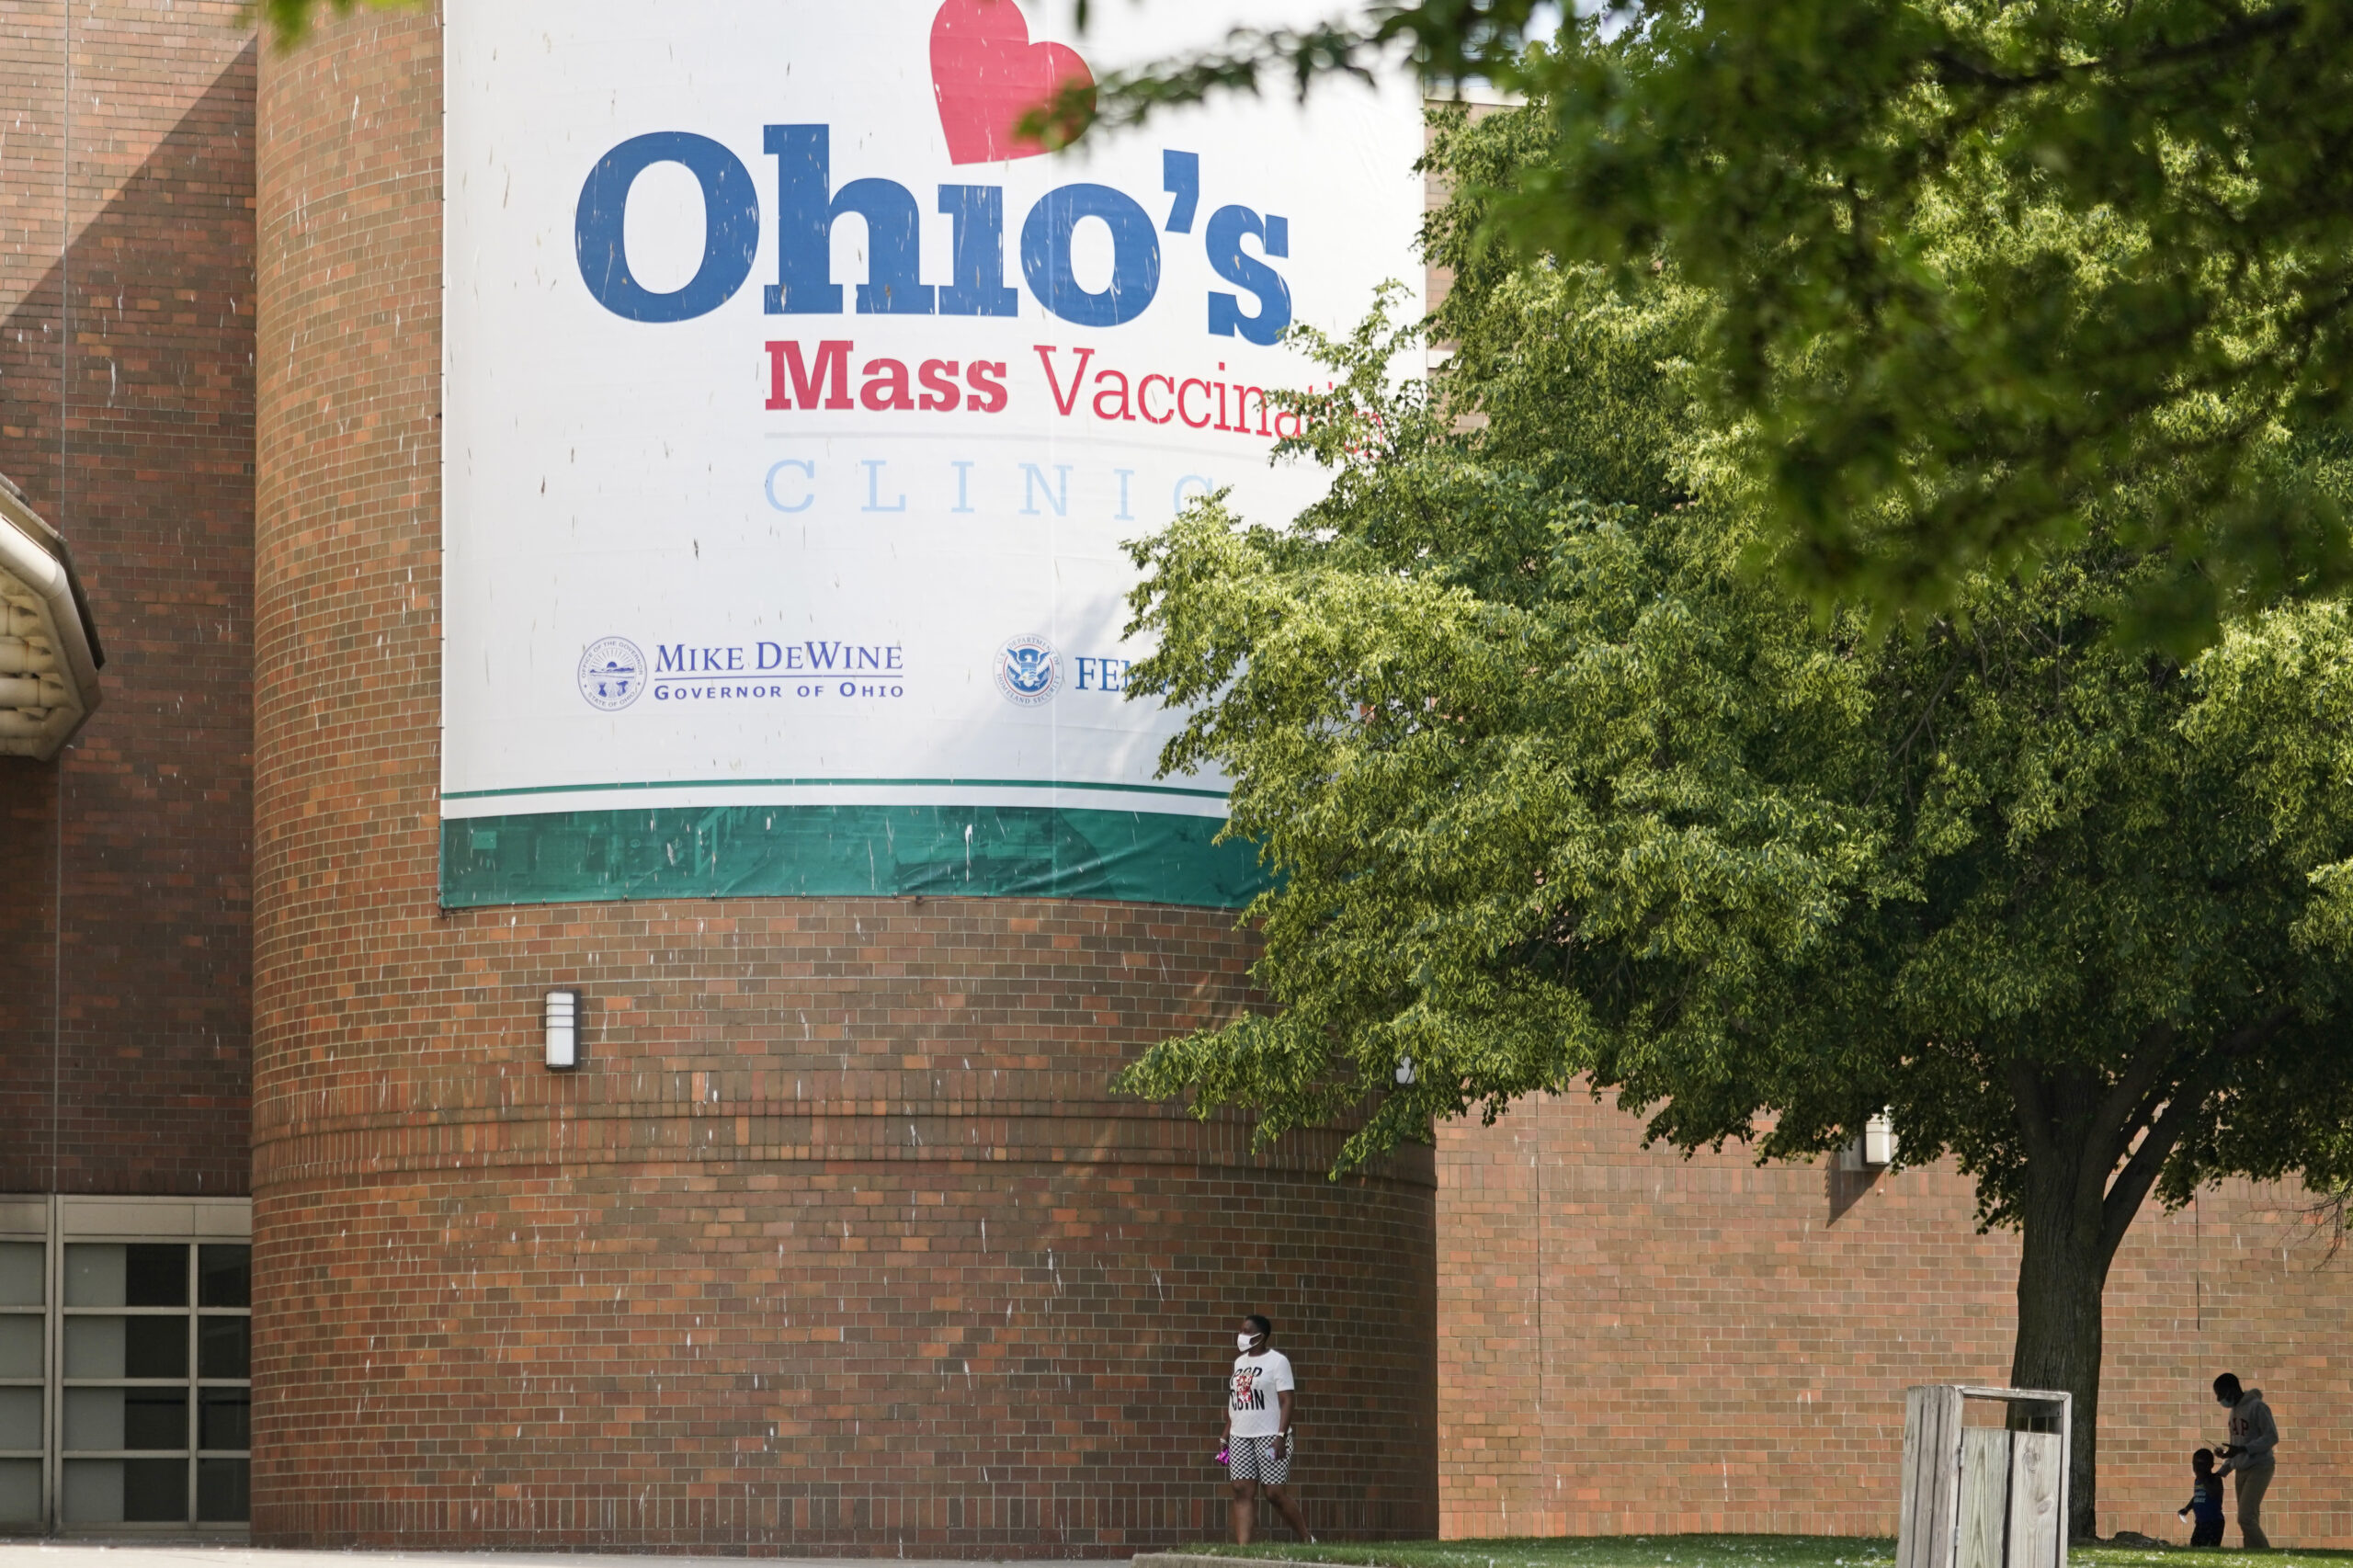 People walk past sign displayed for Ohio's COVID-19 mass vaccination clinic at Cleveland State University, Tuesday, May 25, 2021, in Cleveland. Nearly 2.8 million residents have registered for Ohio's Vax-a-Million vaccination incentive program, with participants hoping to win either the $1 million prize for adults or a full-ride college scholarship for children, Gov. Mike DeWine announced Monday, May 24. The winners will be announced Wednesday night at the end of the Ohio Lottery's Cash Explosion TV show, and then each Wednesday for the next four weeks. (AP Photo/Tony Dejak)